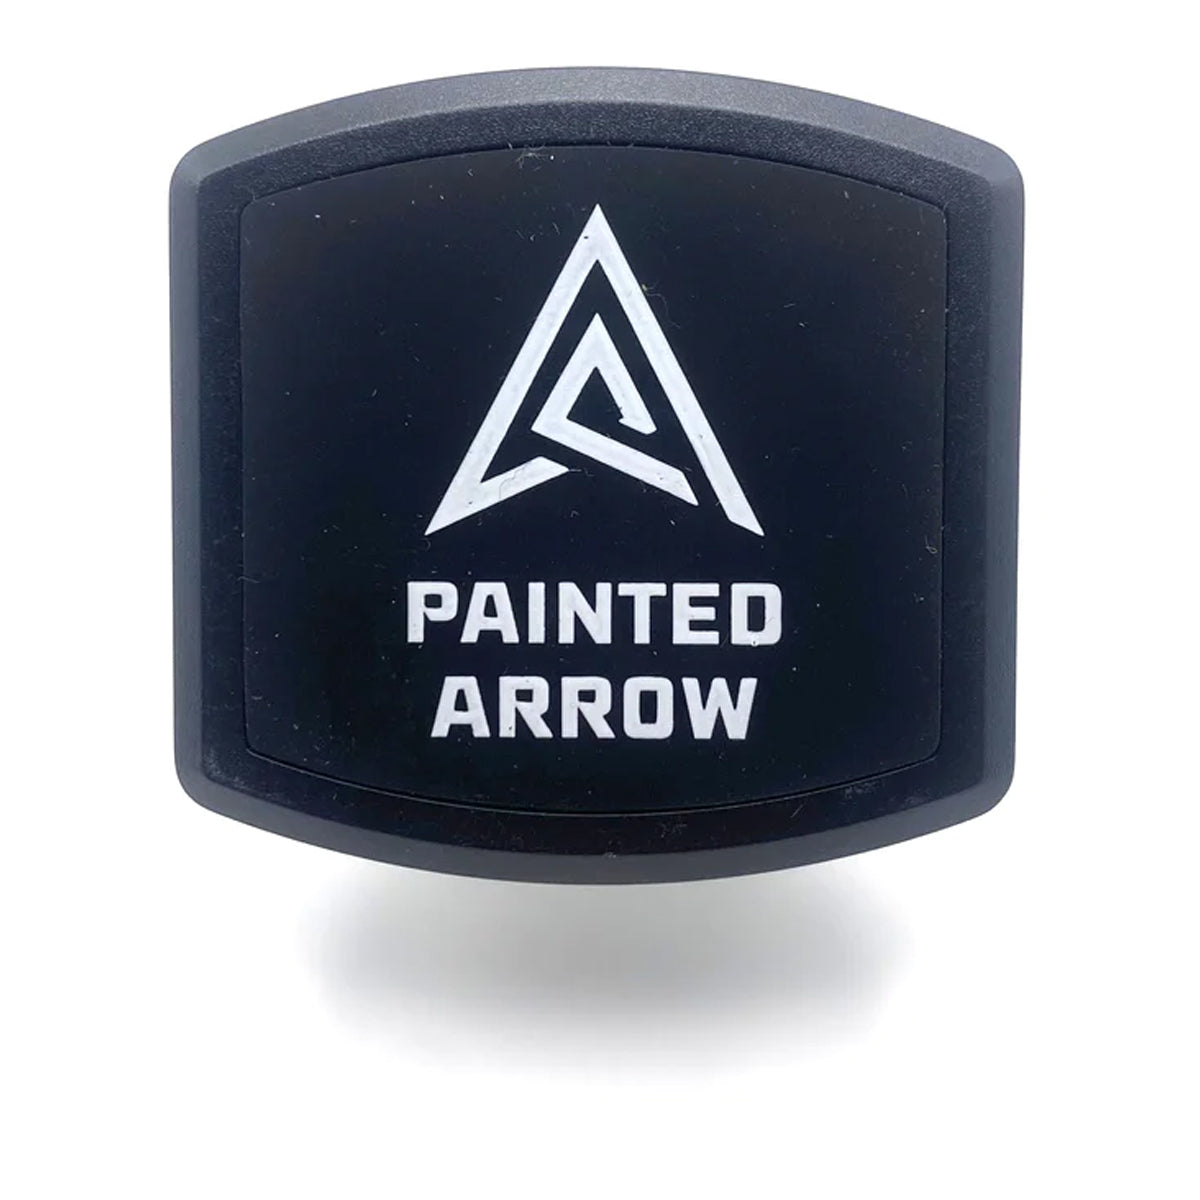 Painted Arrow Outdoors Truck Mount in  by GOHUNT | Painted Arrow Outdoors - GOHUNT Shop